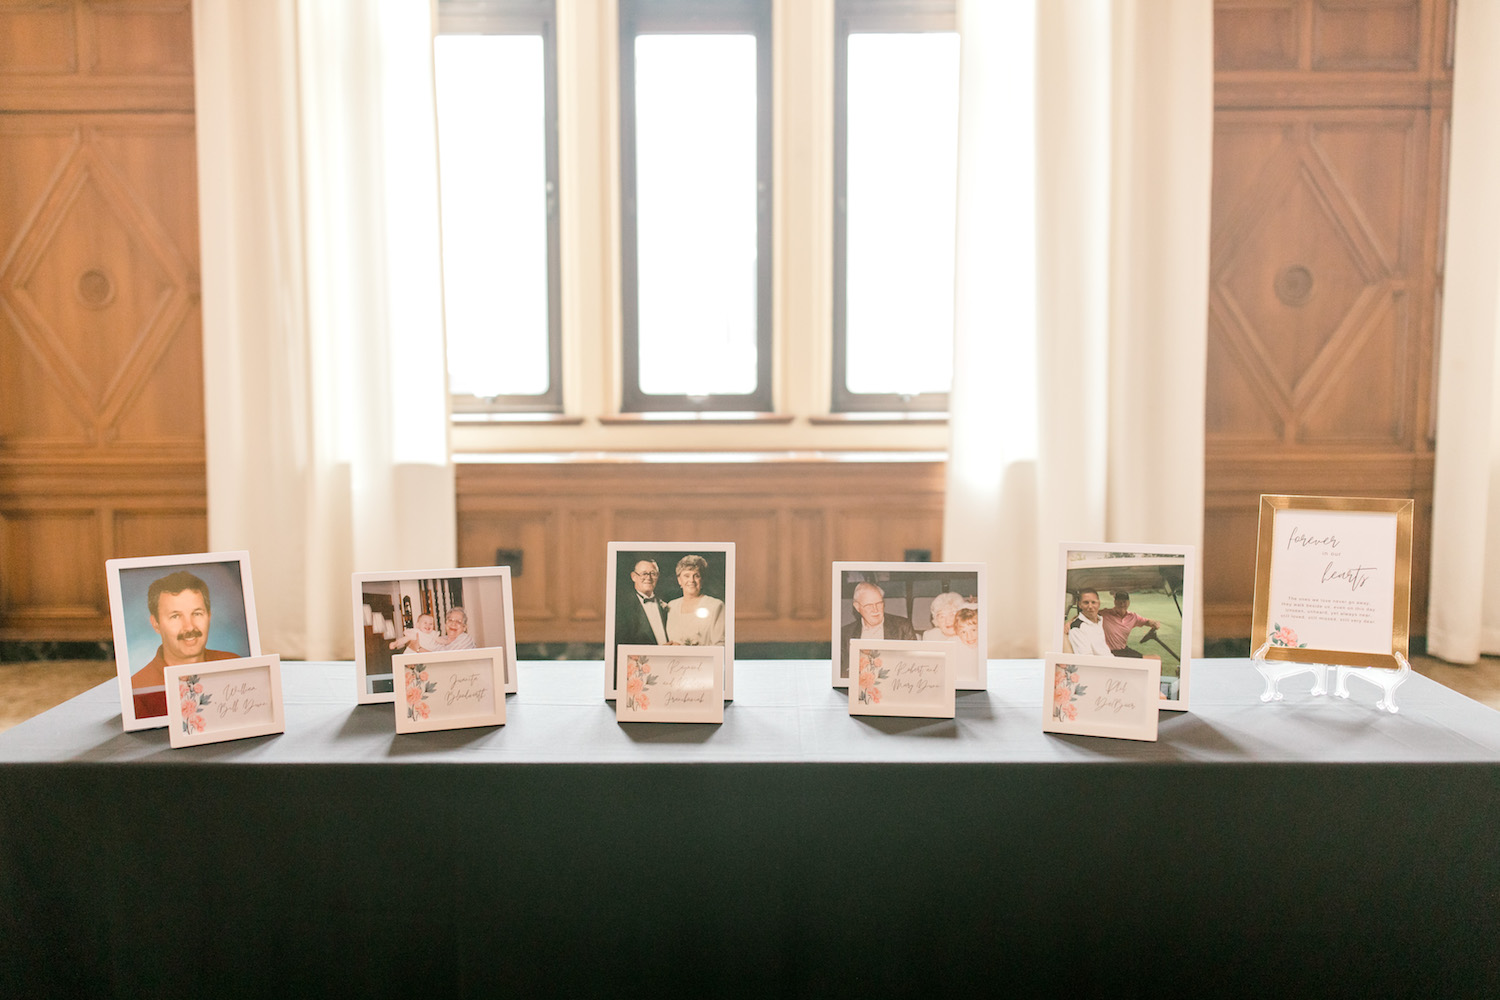 Photos of loved ones on table